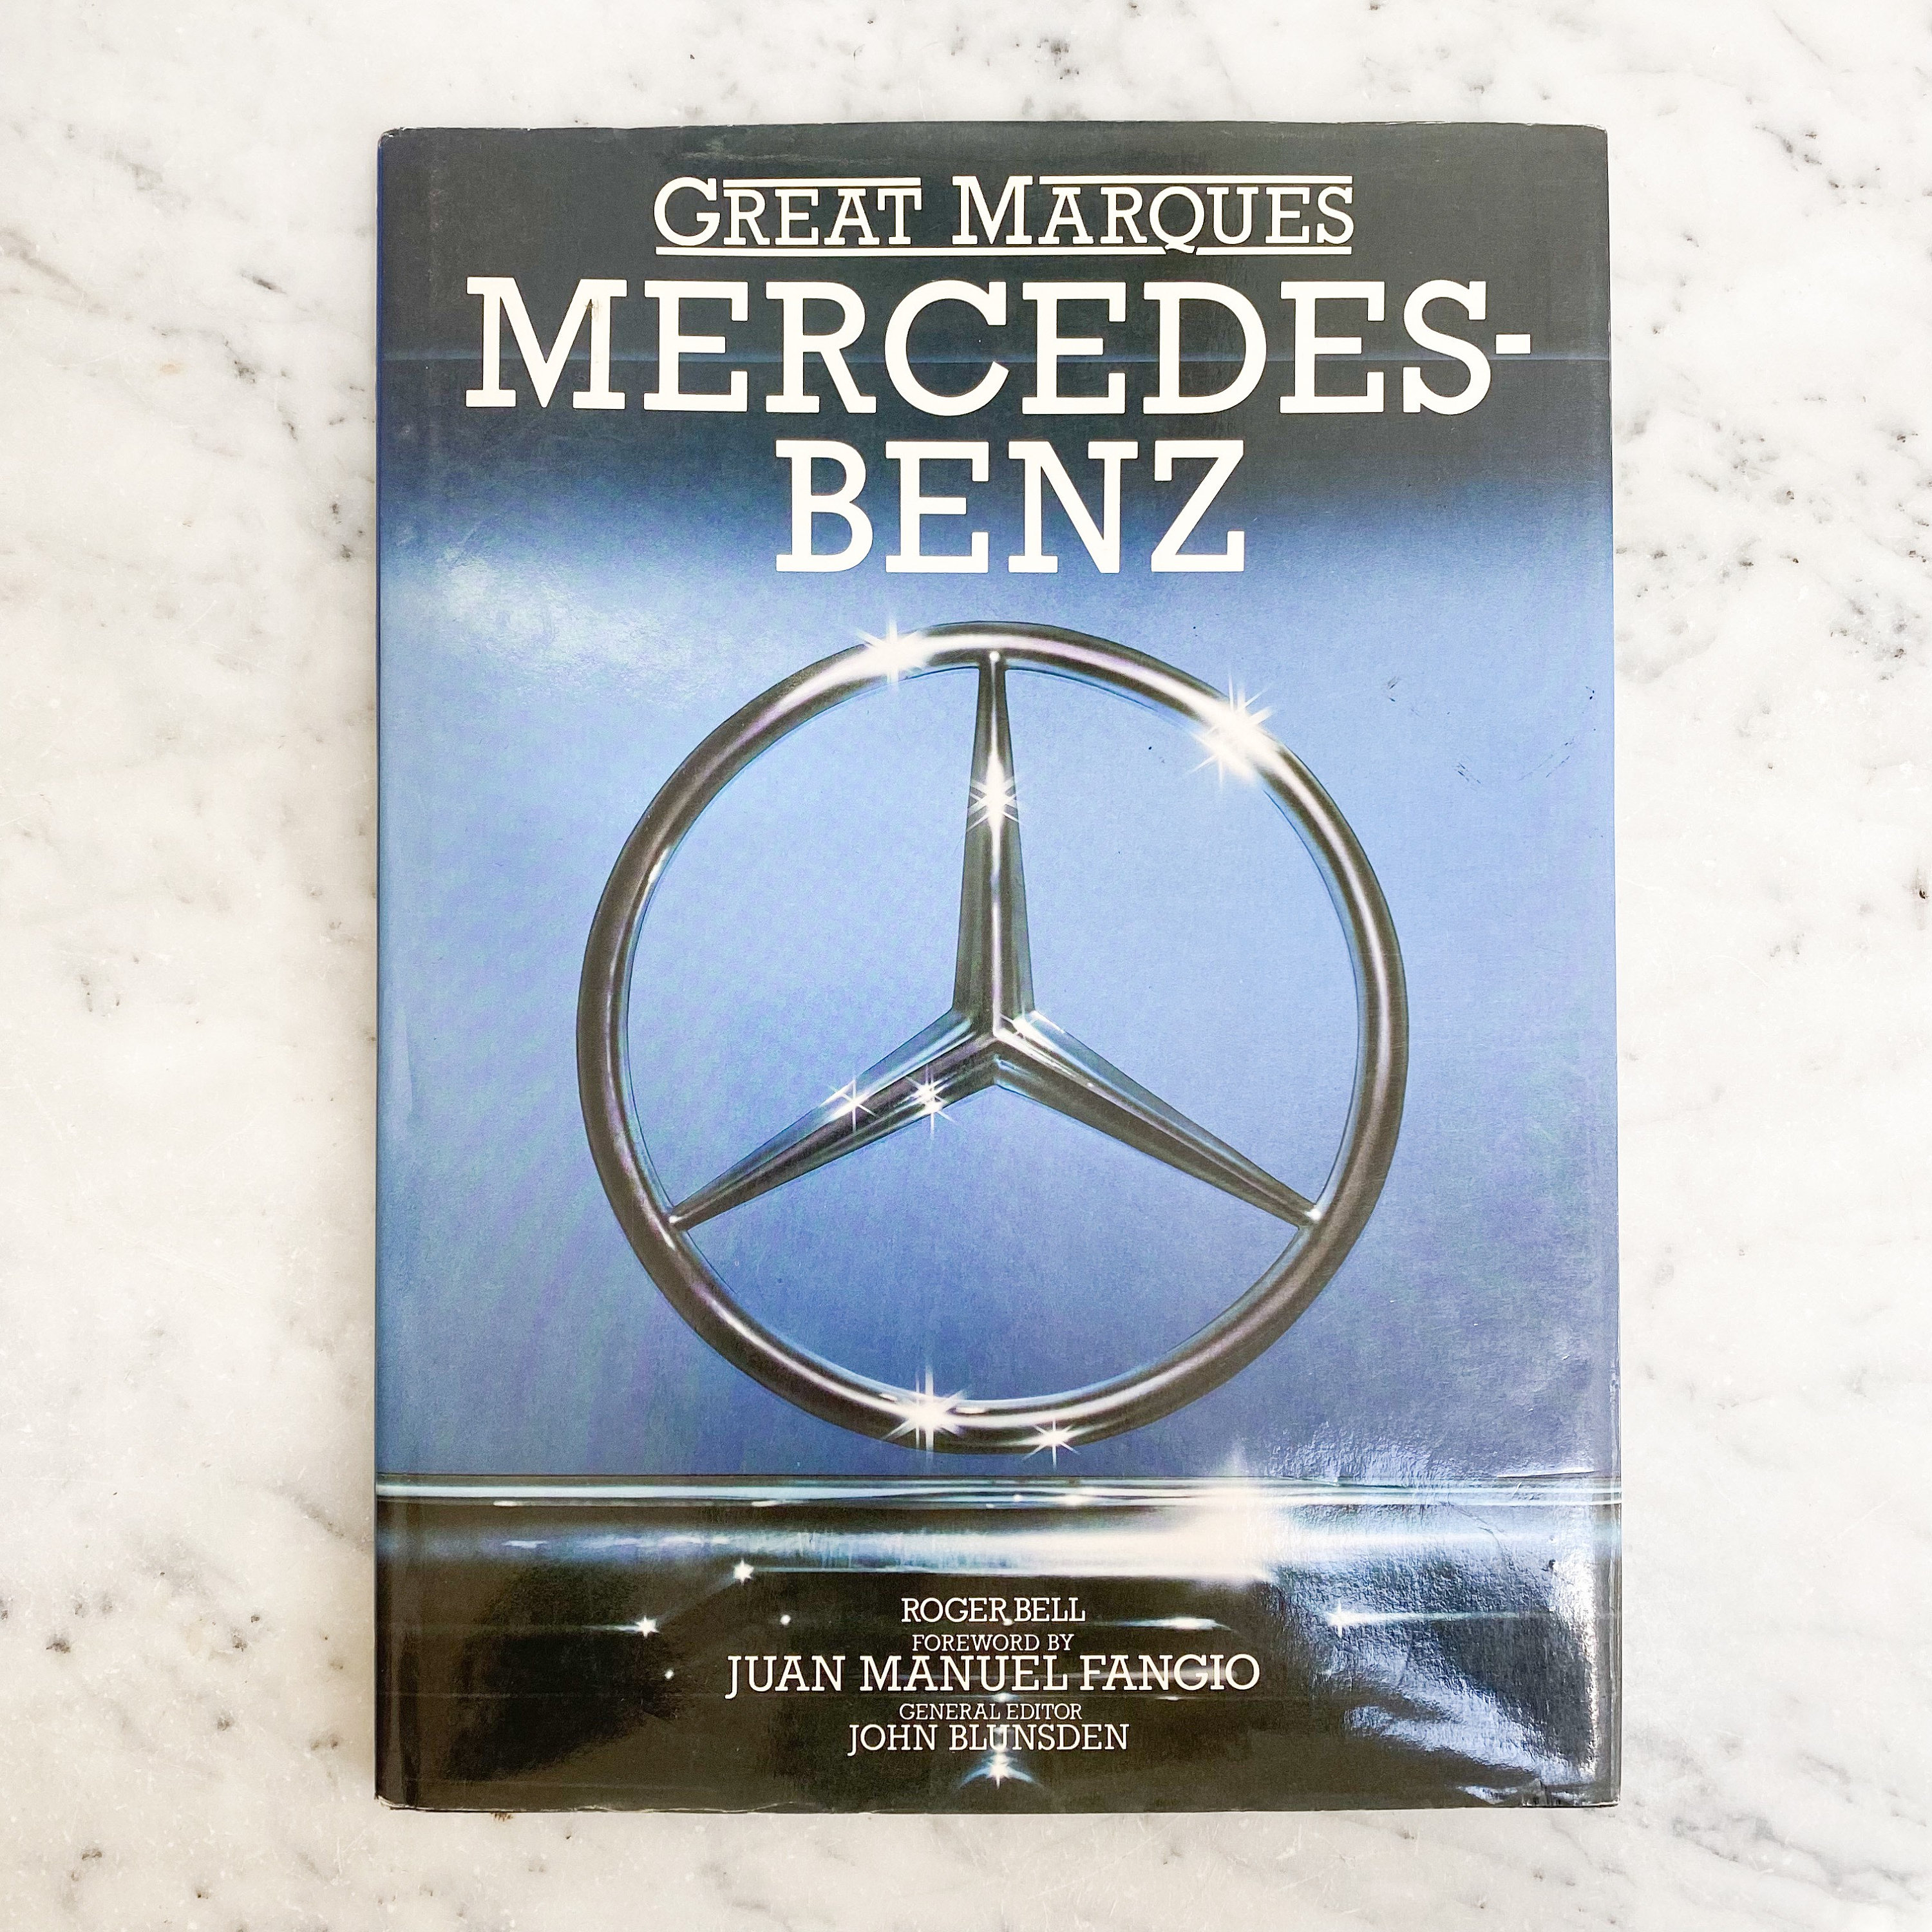 Great Marques: Mercedes-Benz.: BELL Roger -: 2019052203084